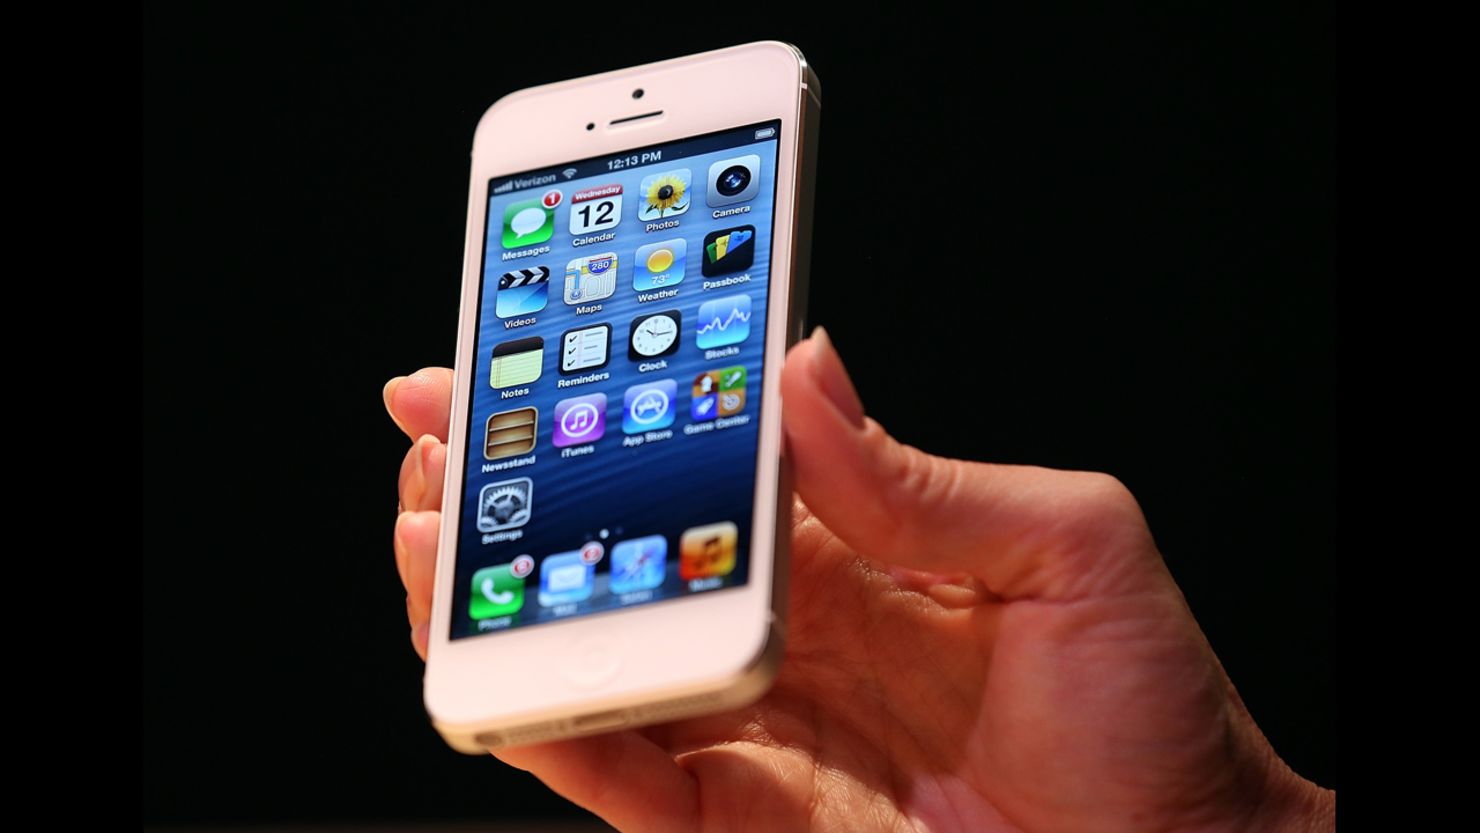 The iPhone 5 has been plagued by rumors of supply-chain problems since it went on sale in September.